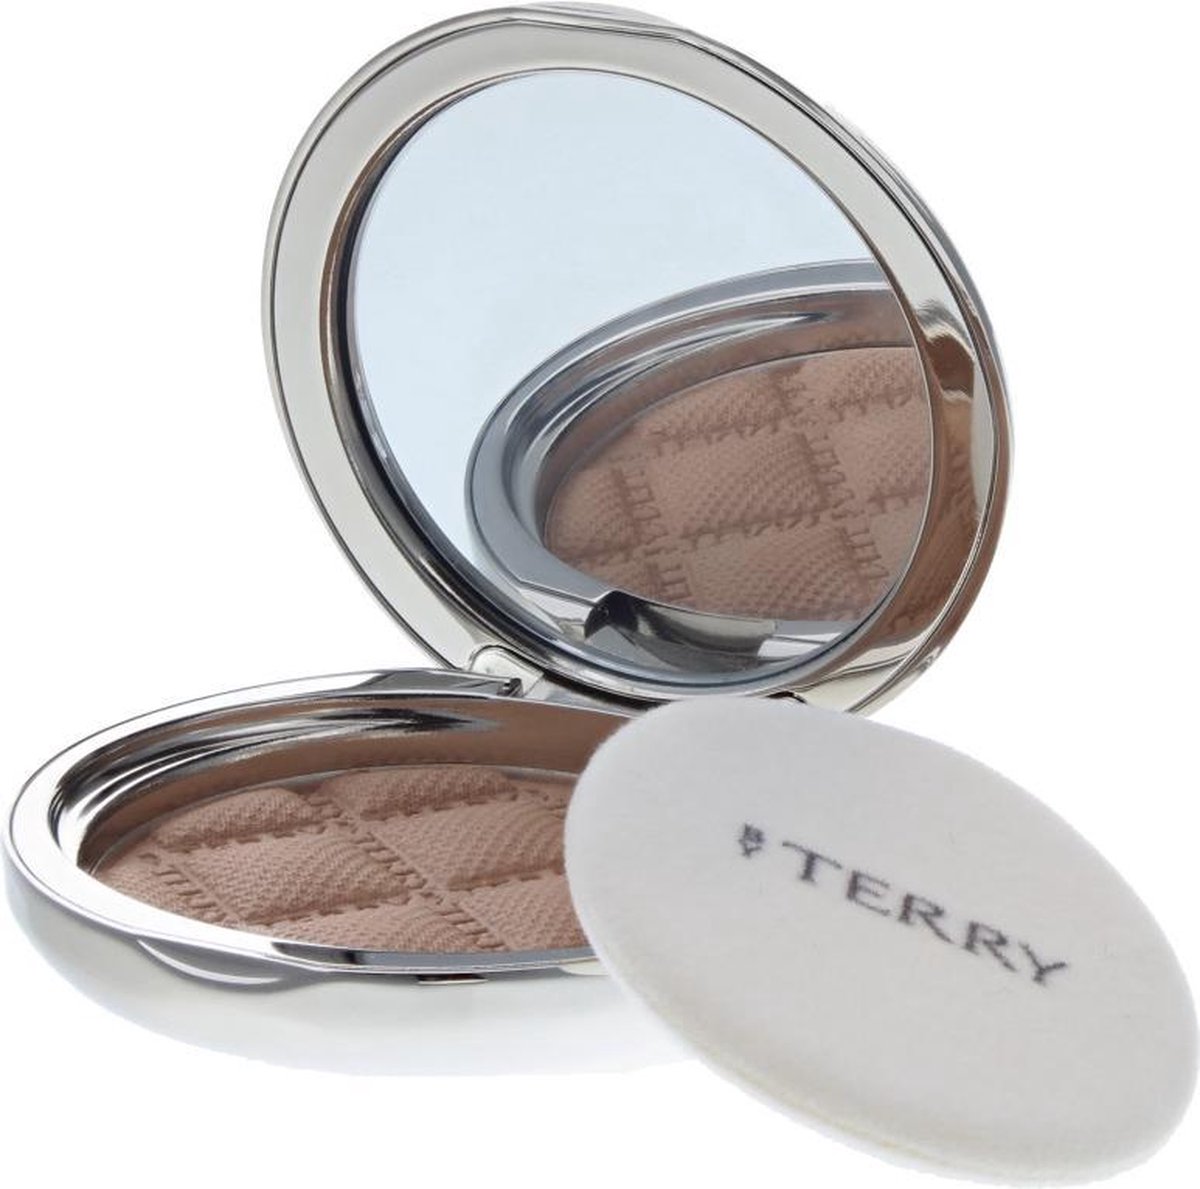 ​By Terry - Terrybly Densiliss Compact - 4 - Deep Nude